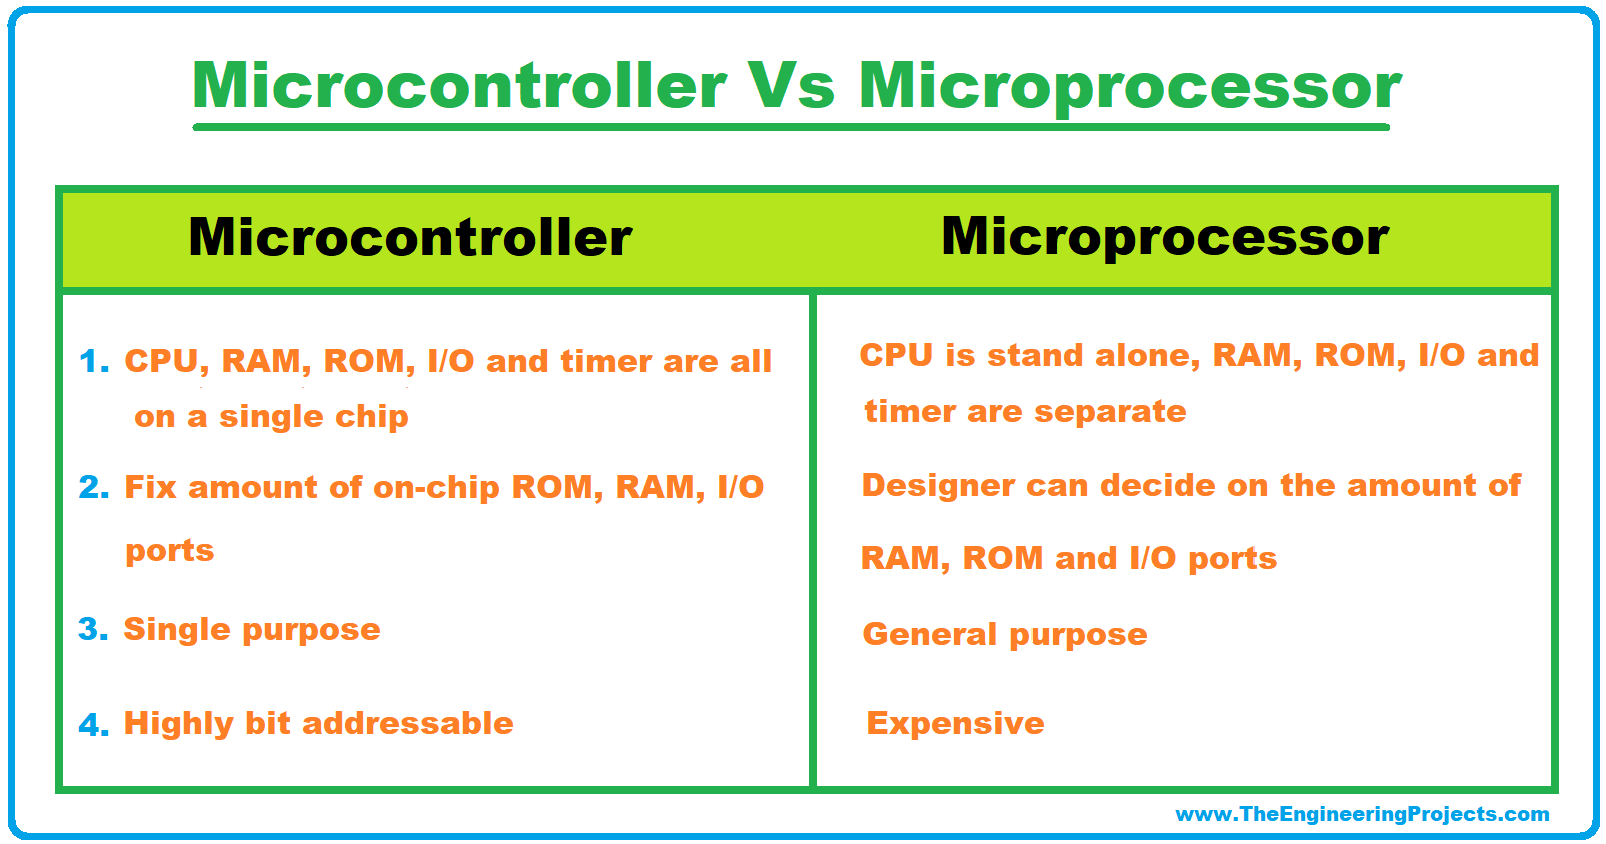 What is a Microcontroller, Microcontrollers Compilers, Microcontrollers Architecture, Types of Microcontrollers, Microcontroller Vs Microprocessor, Microcontroller Characteristics, Microcontrollers Applications